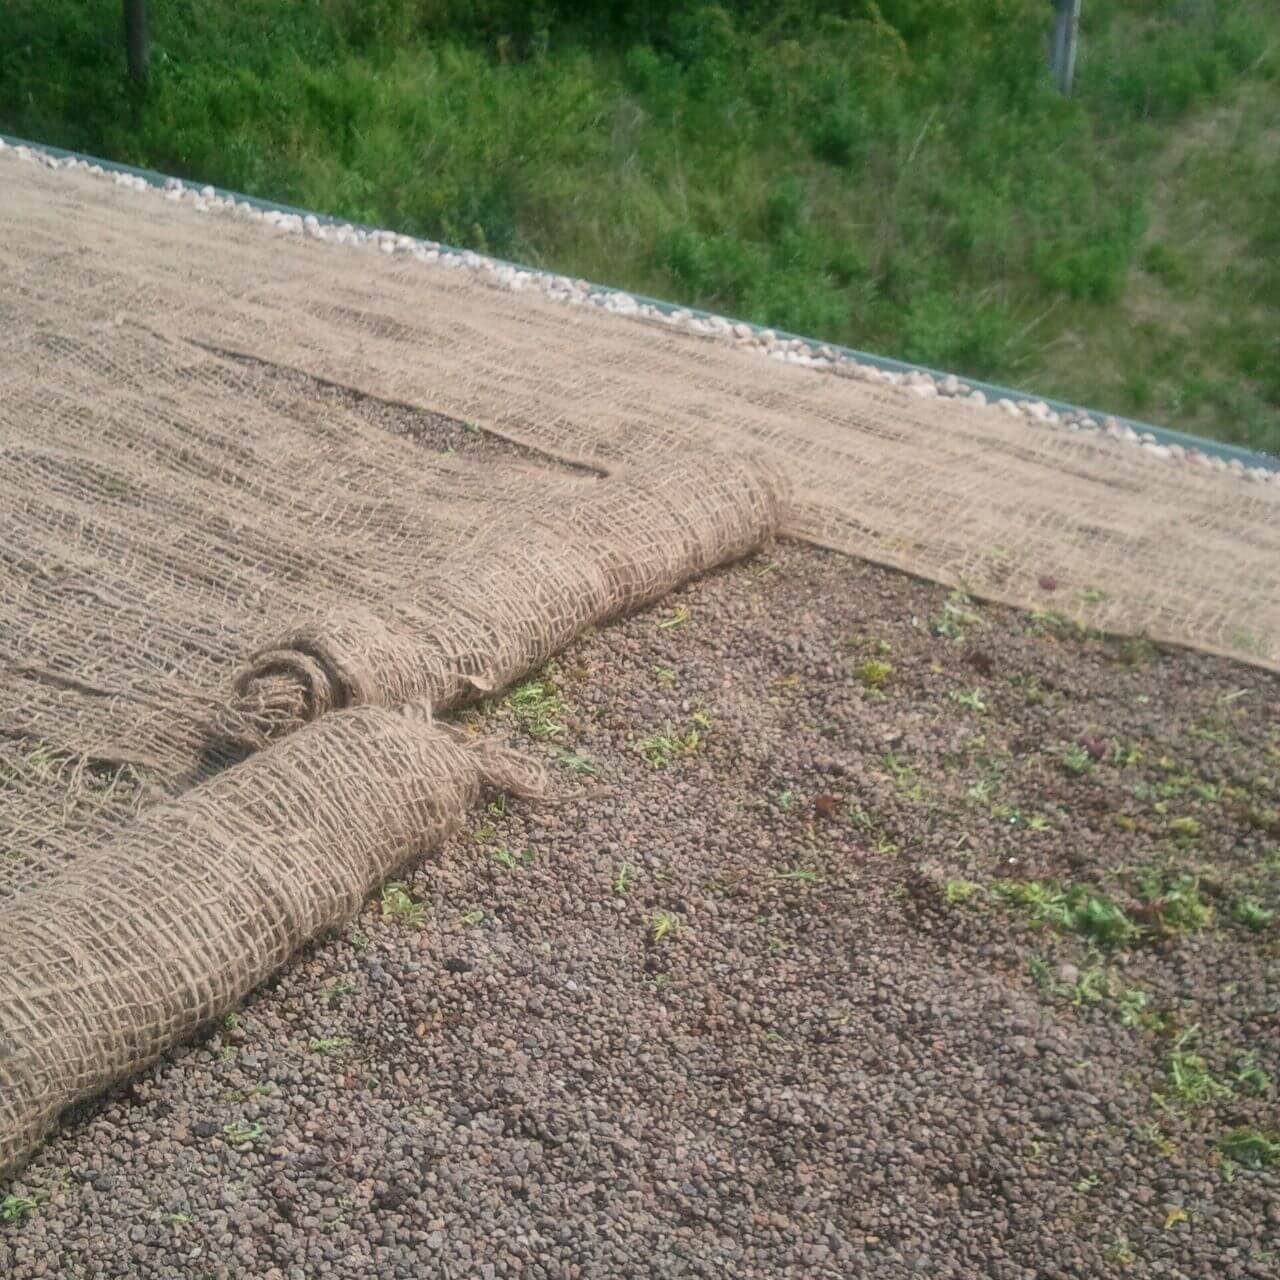 A close up of the edge of a roof